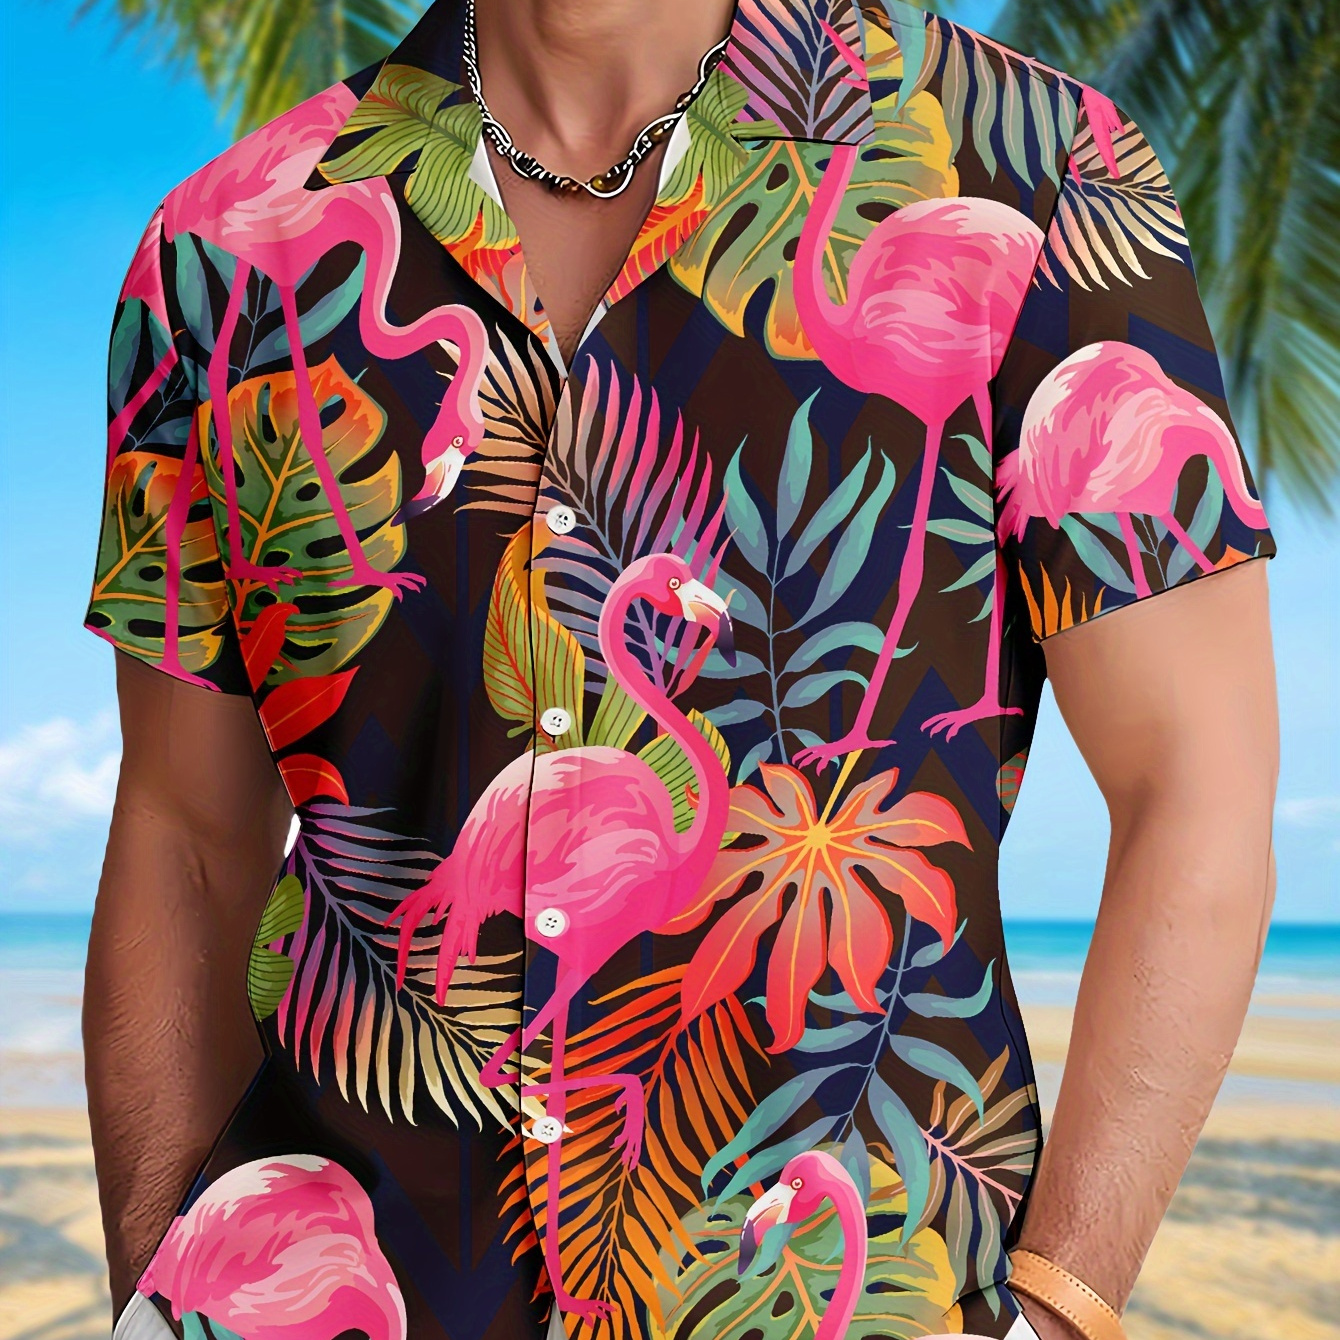 

Men's Short Sleeve Button-up Shirt With Fancy Floral And Flamingo Print, Casual Summer Hawaiian Style, Daily Vacation Beachwear For Men